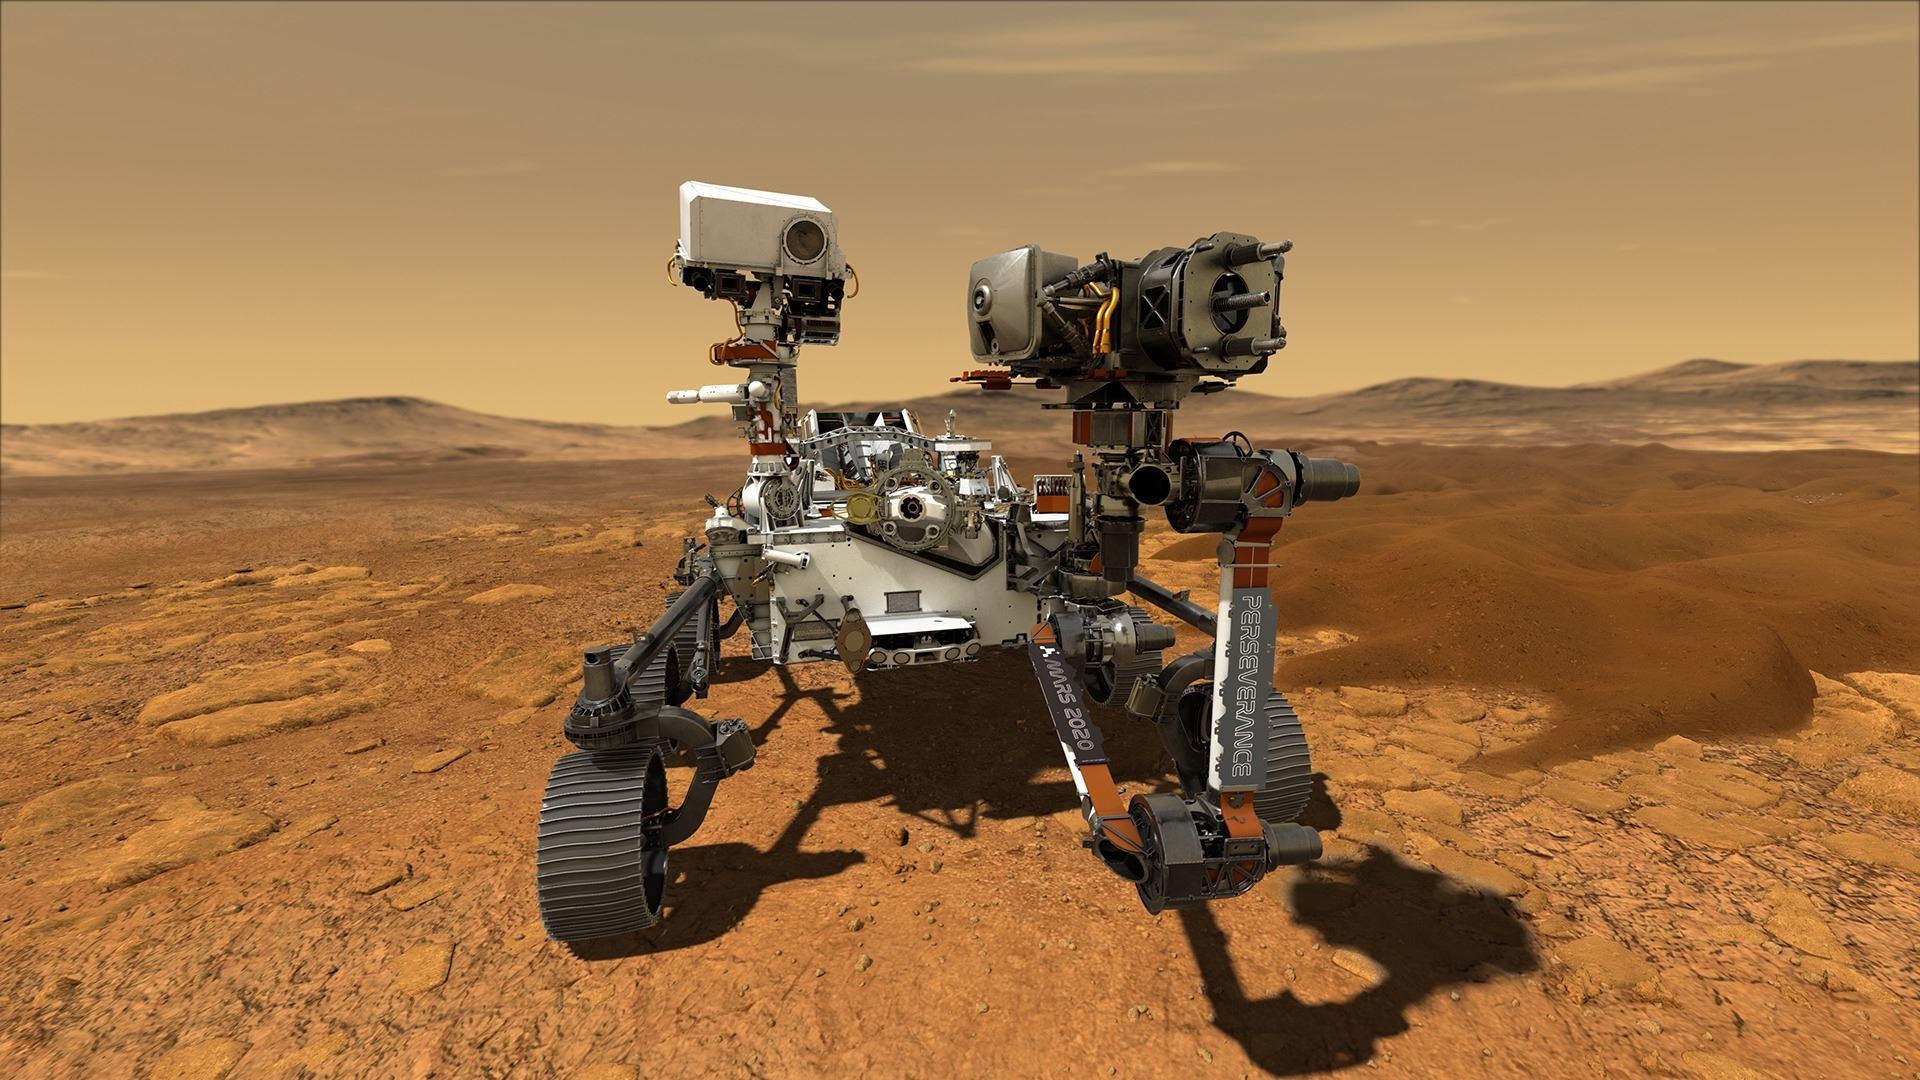 NASA’s Perseverance Rover collected samples during its exploration of an ancient crater on Mars.